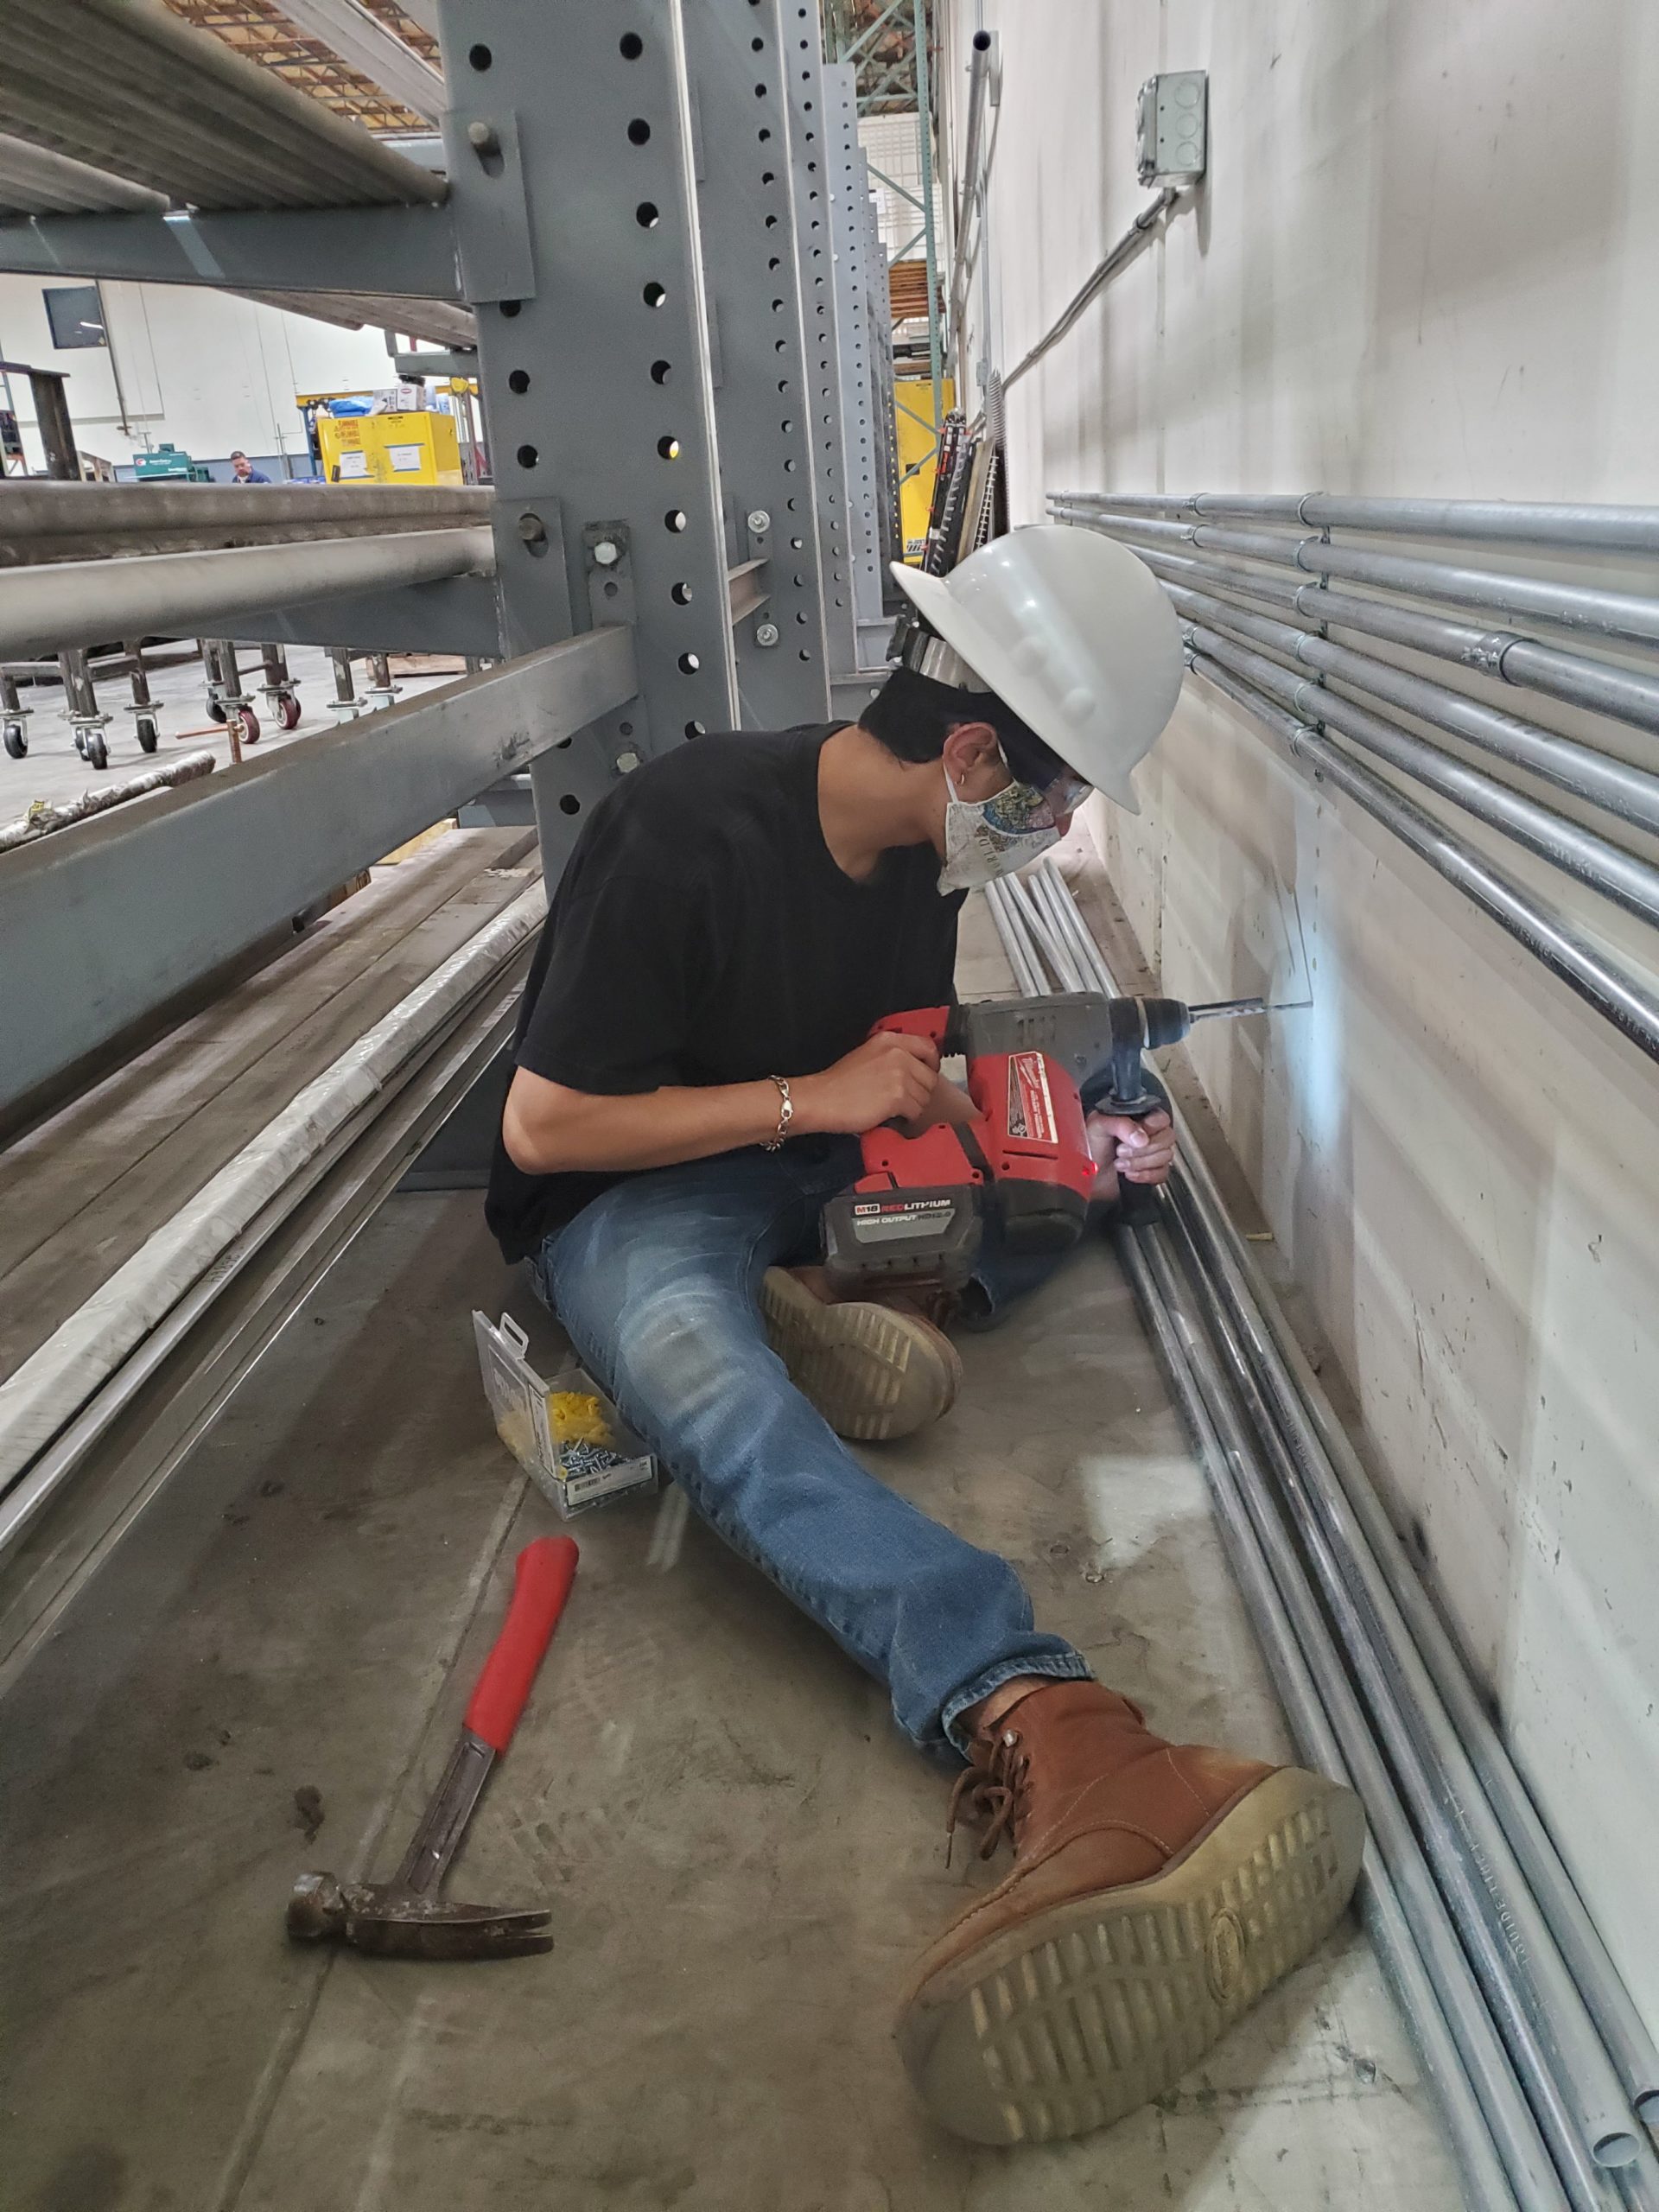 Electrical contractor sitting down while using a power tool